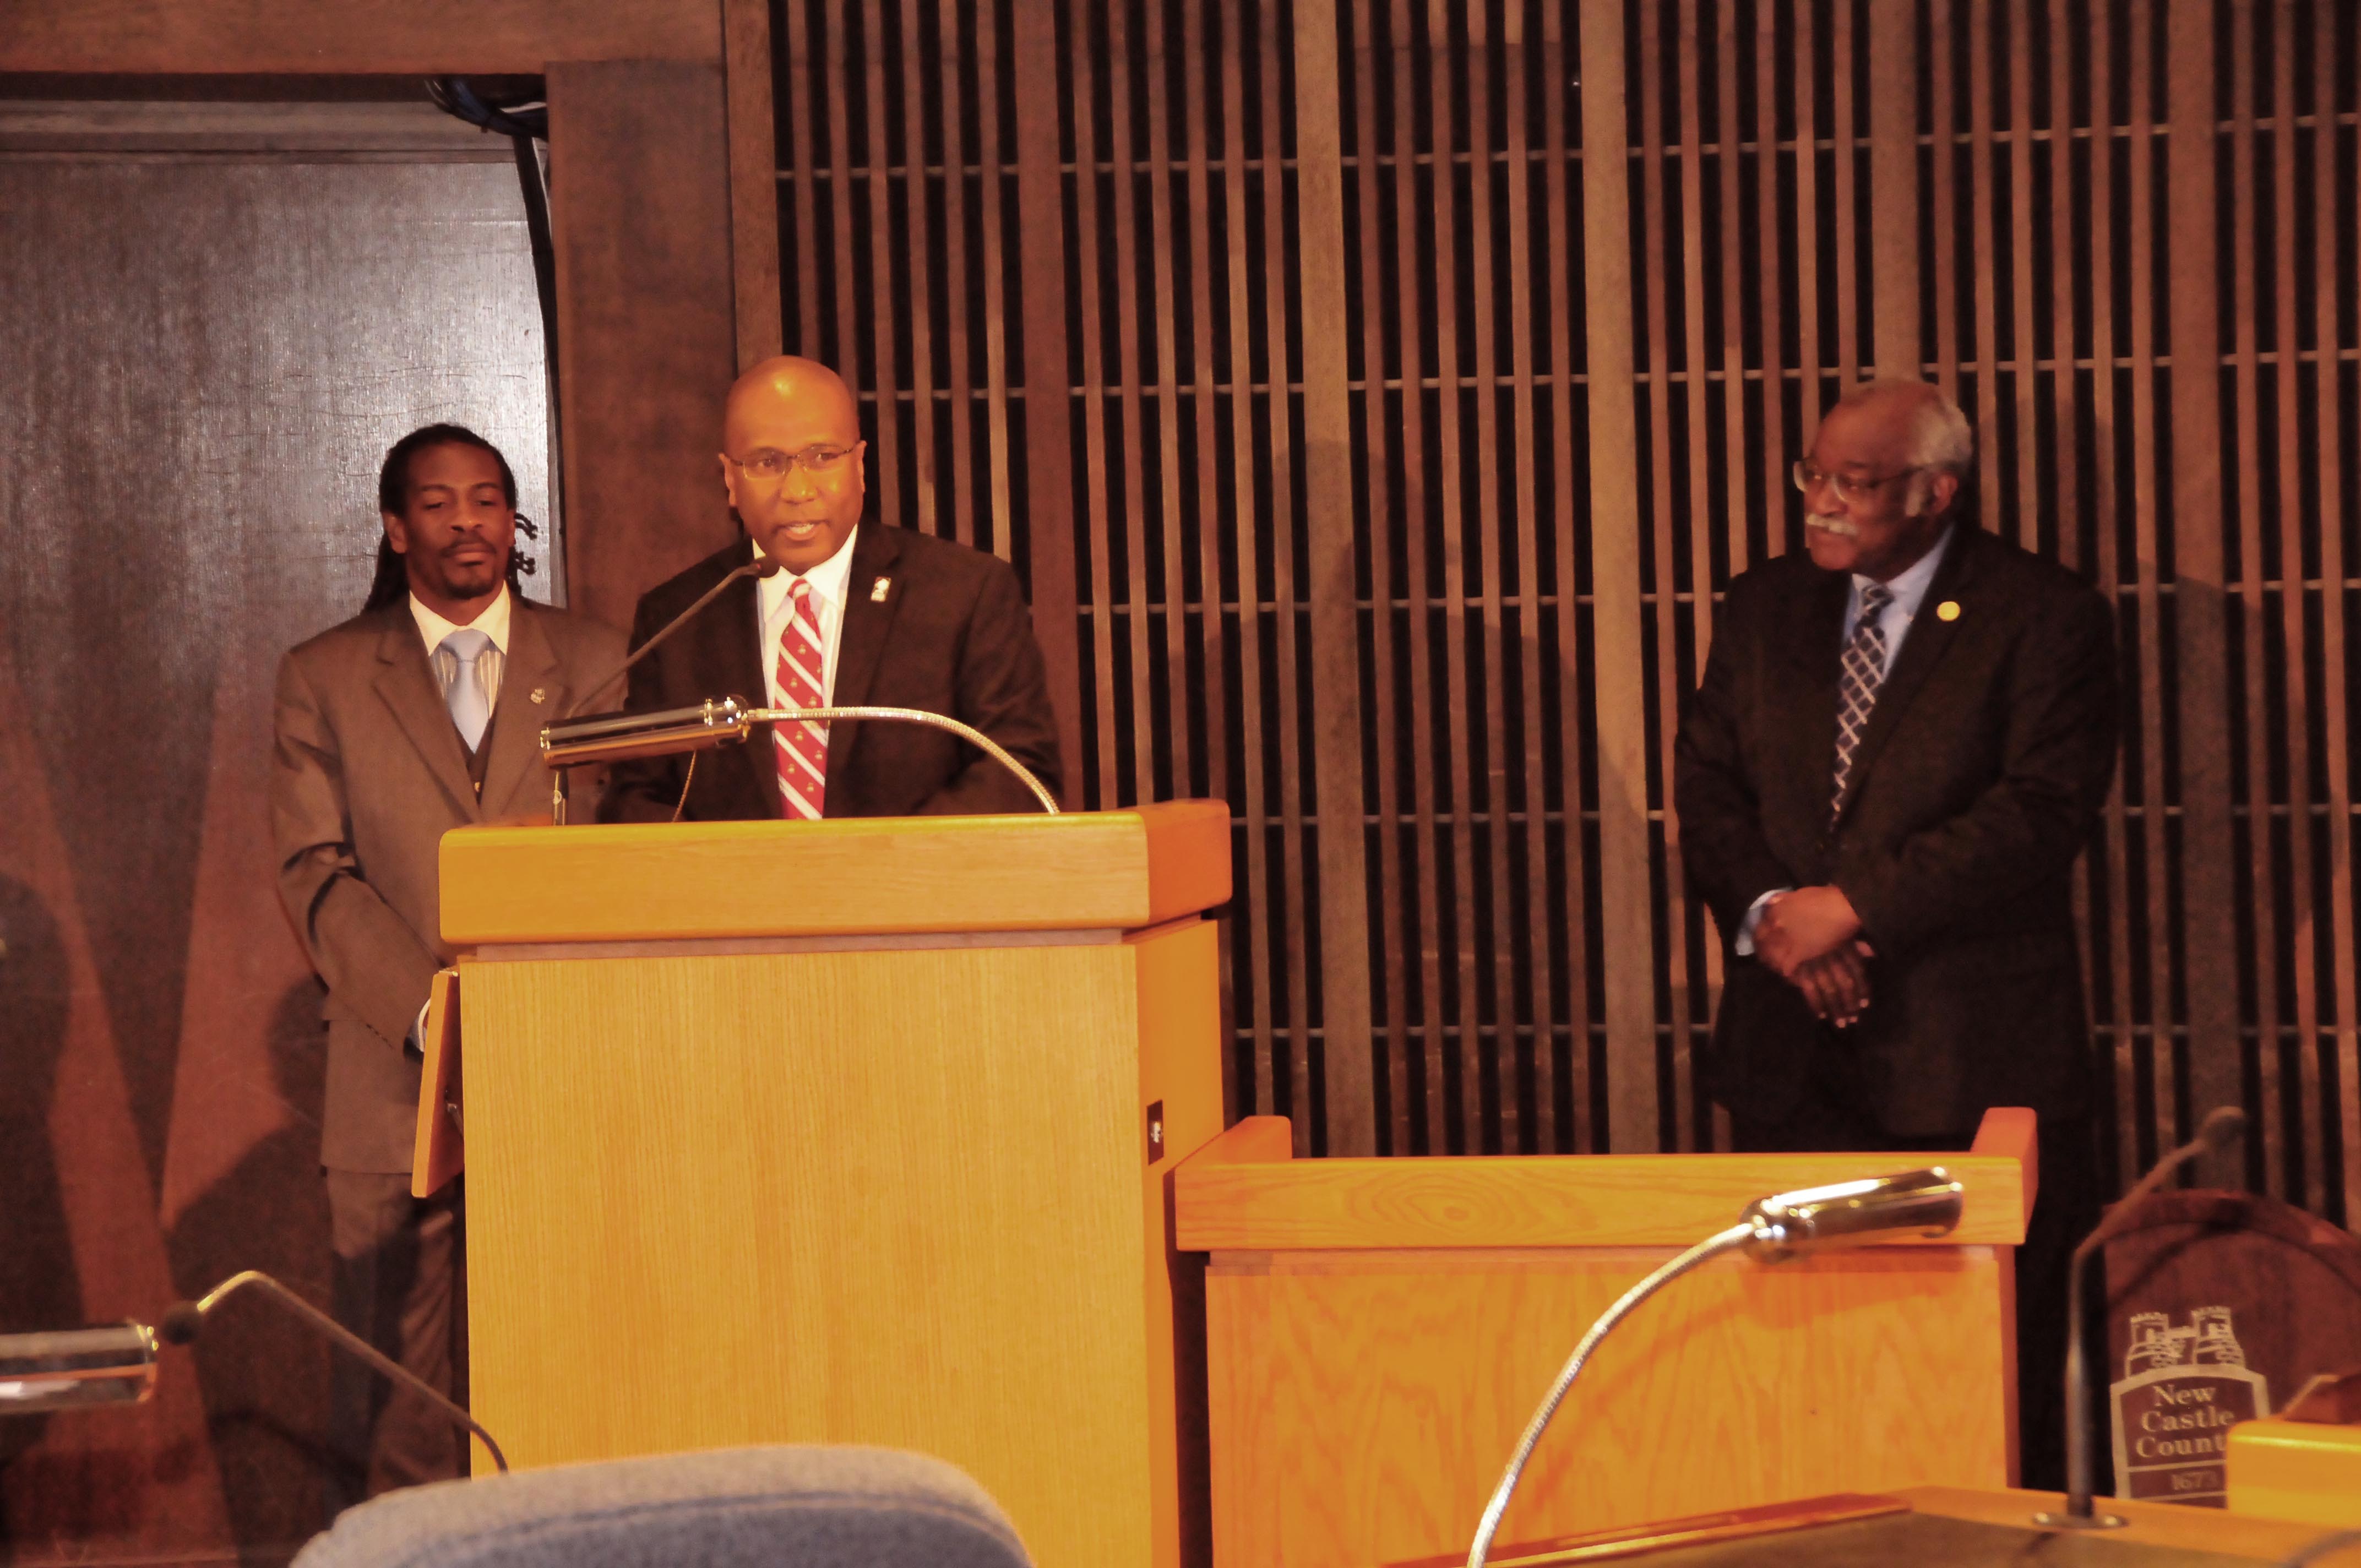 Dr. Harry L. Williams expresses his gratitude to the Wilmington City Council for its unanimous resolution honoring him. Flanking him are Councilman Nnamdi O. Chukwuocha and Councilman Sam Guy, both DSU alumni, Class of 1996 and Classes of 1981 and 1984, respectively.